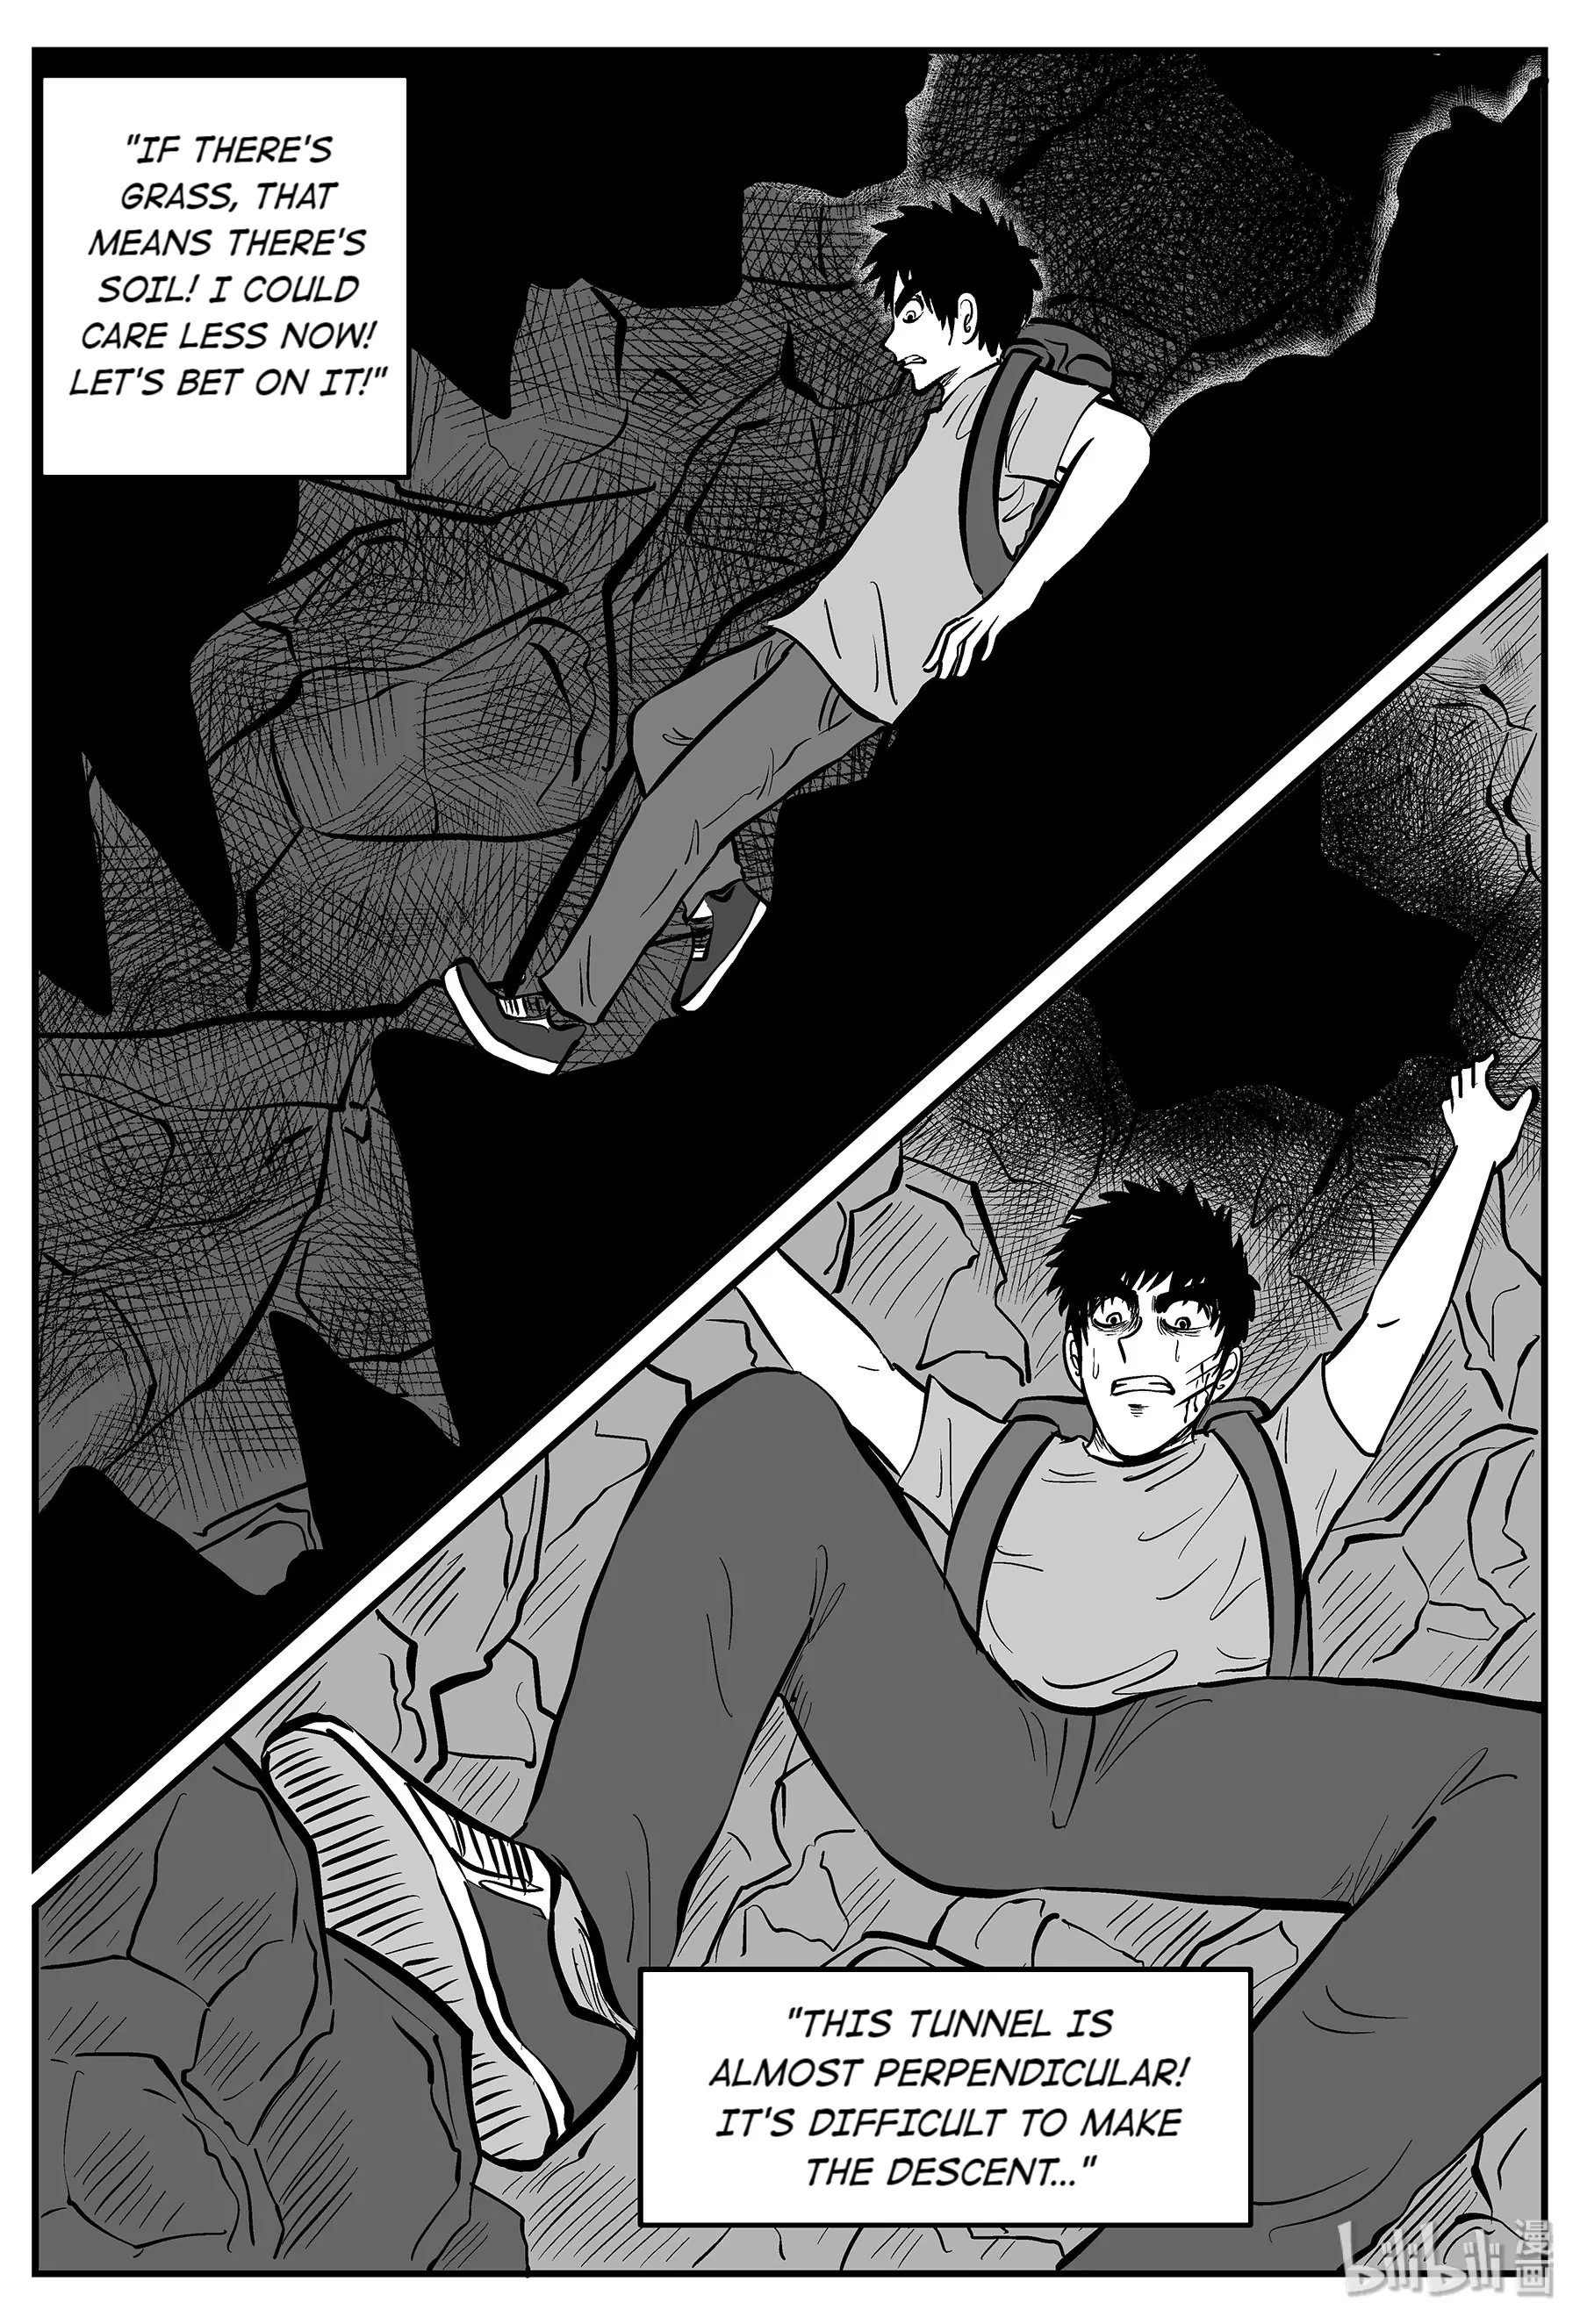 Strange Tales Of Xiao Zhi - 28 page 2